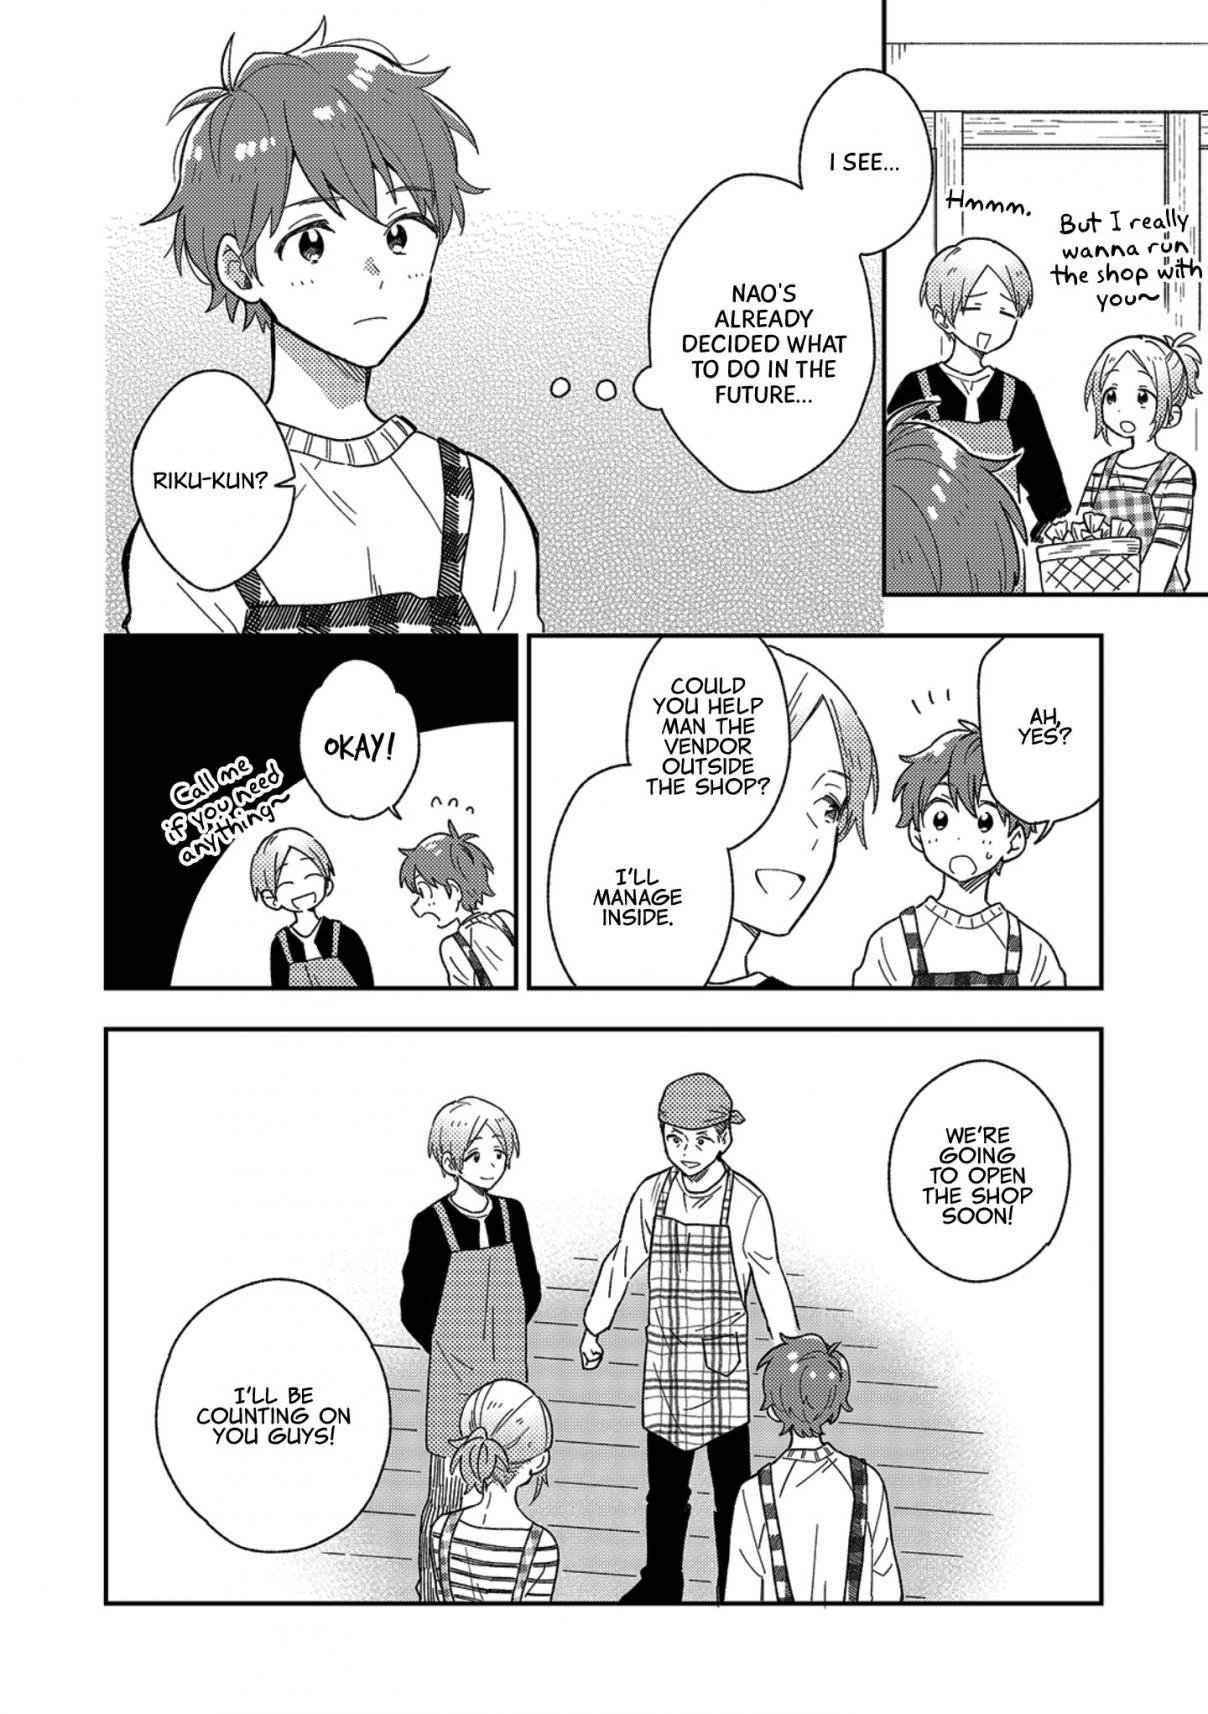 High School Boys Are Hungry Again Today Vol. 1 Ch. 11 Muffin